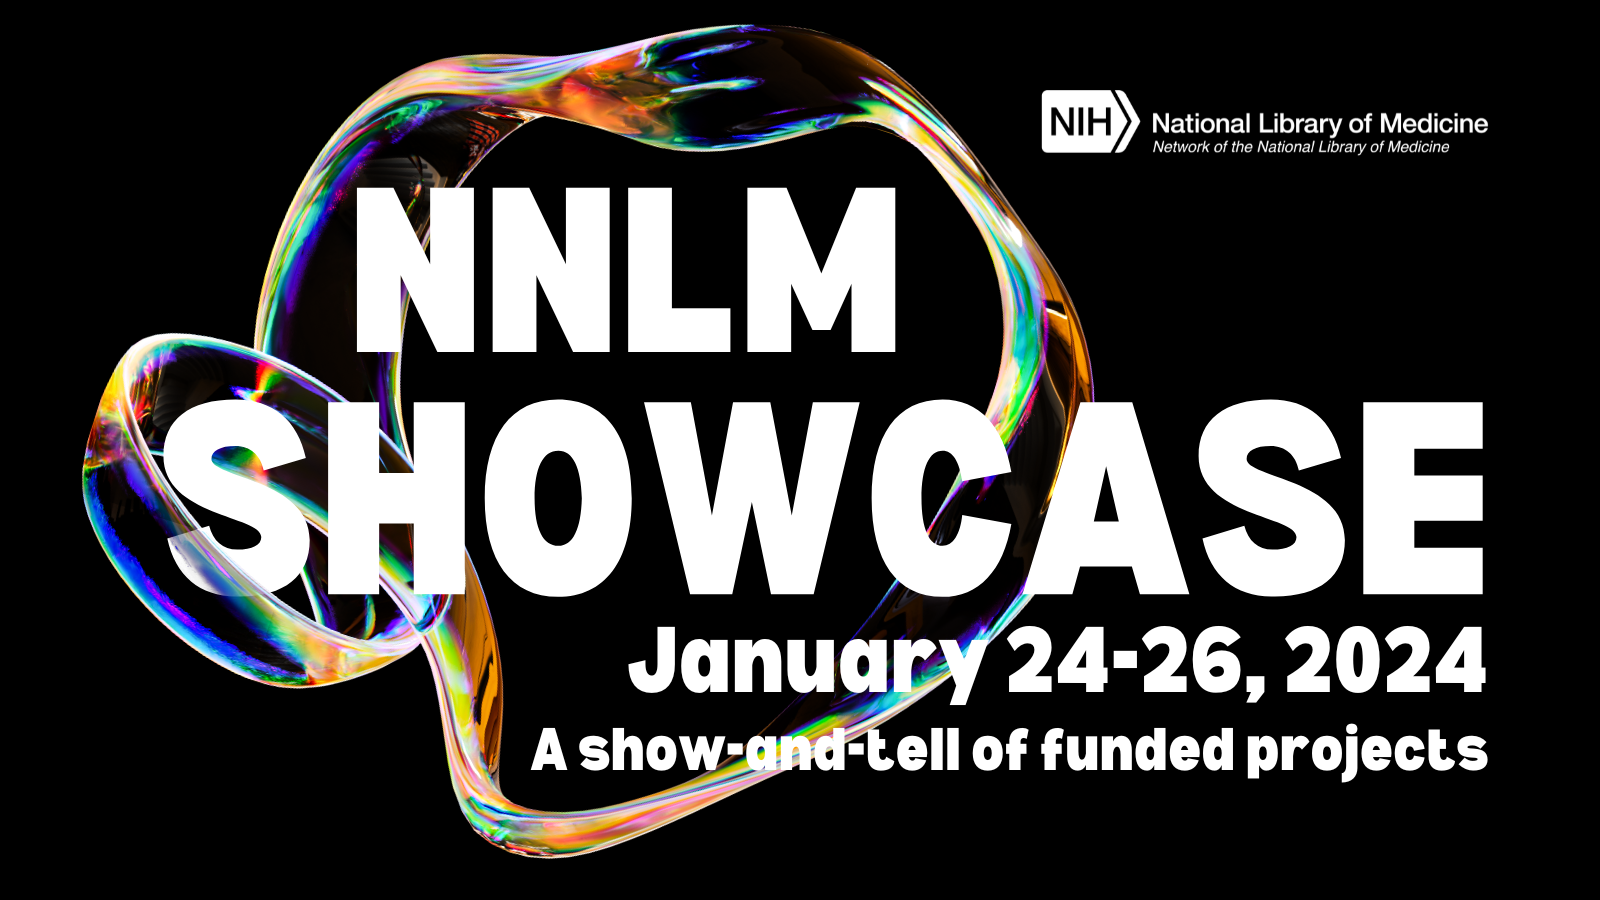  black graphic with bubble advertising the NNLM Showcase 2024, a show-and-tell of funded projects. January 24-26, 2024.